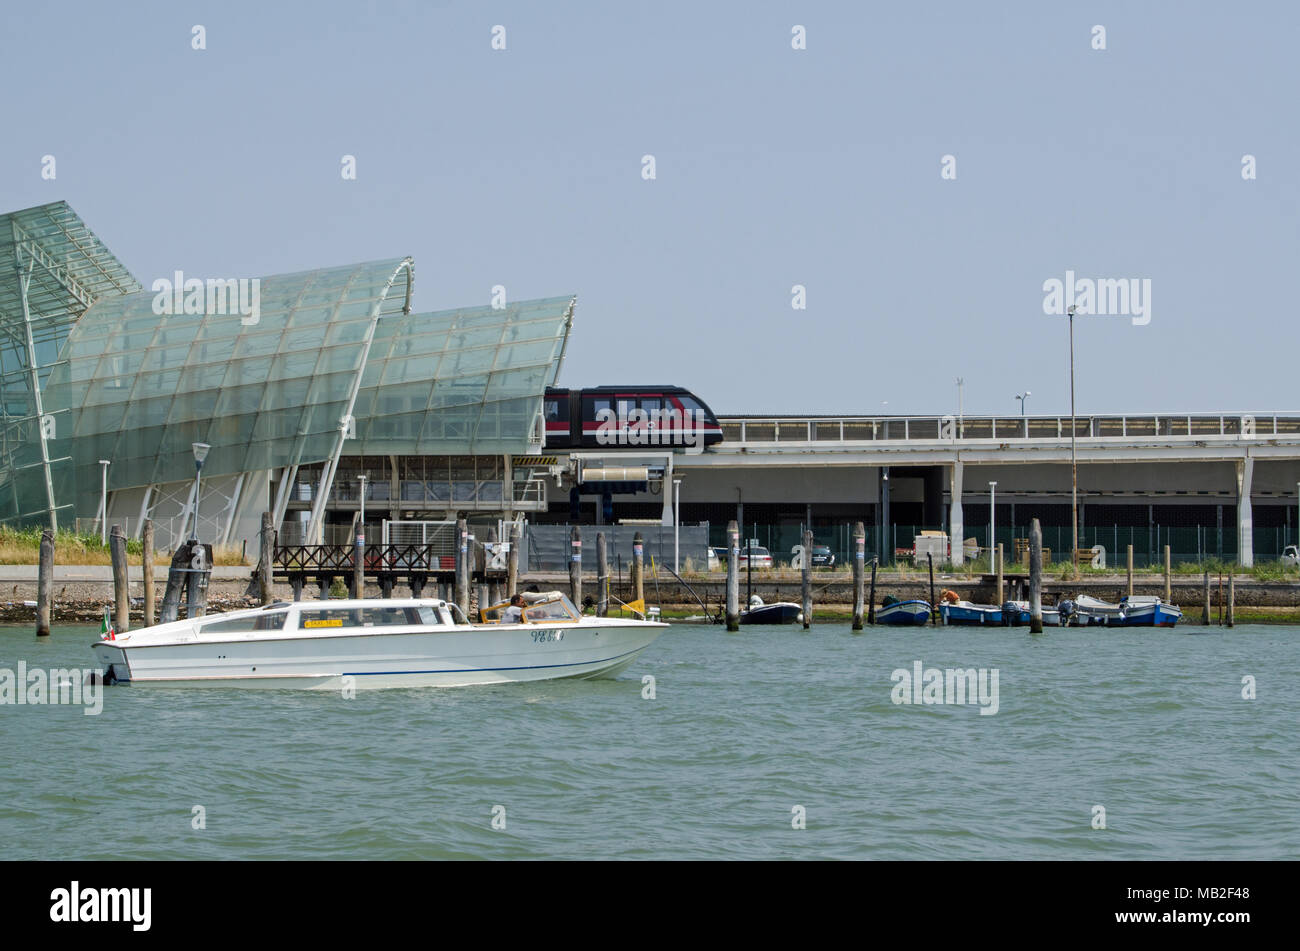 VENICE, ITALY - JUNE 13, 2017: The shuttle train leaving the station which takes passengers from cruise ships over a canal and into the historic city  Stock Photo